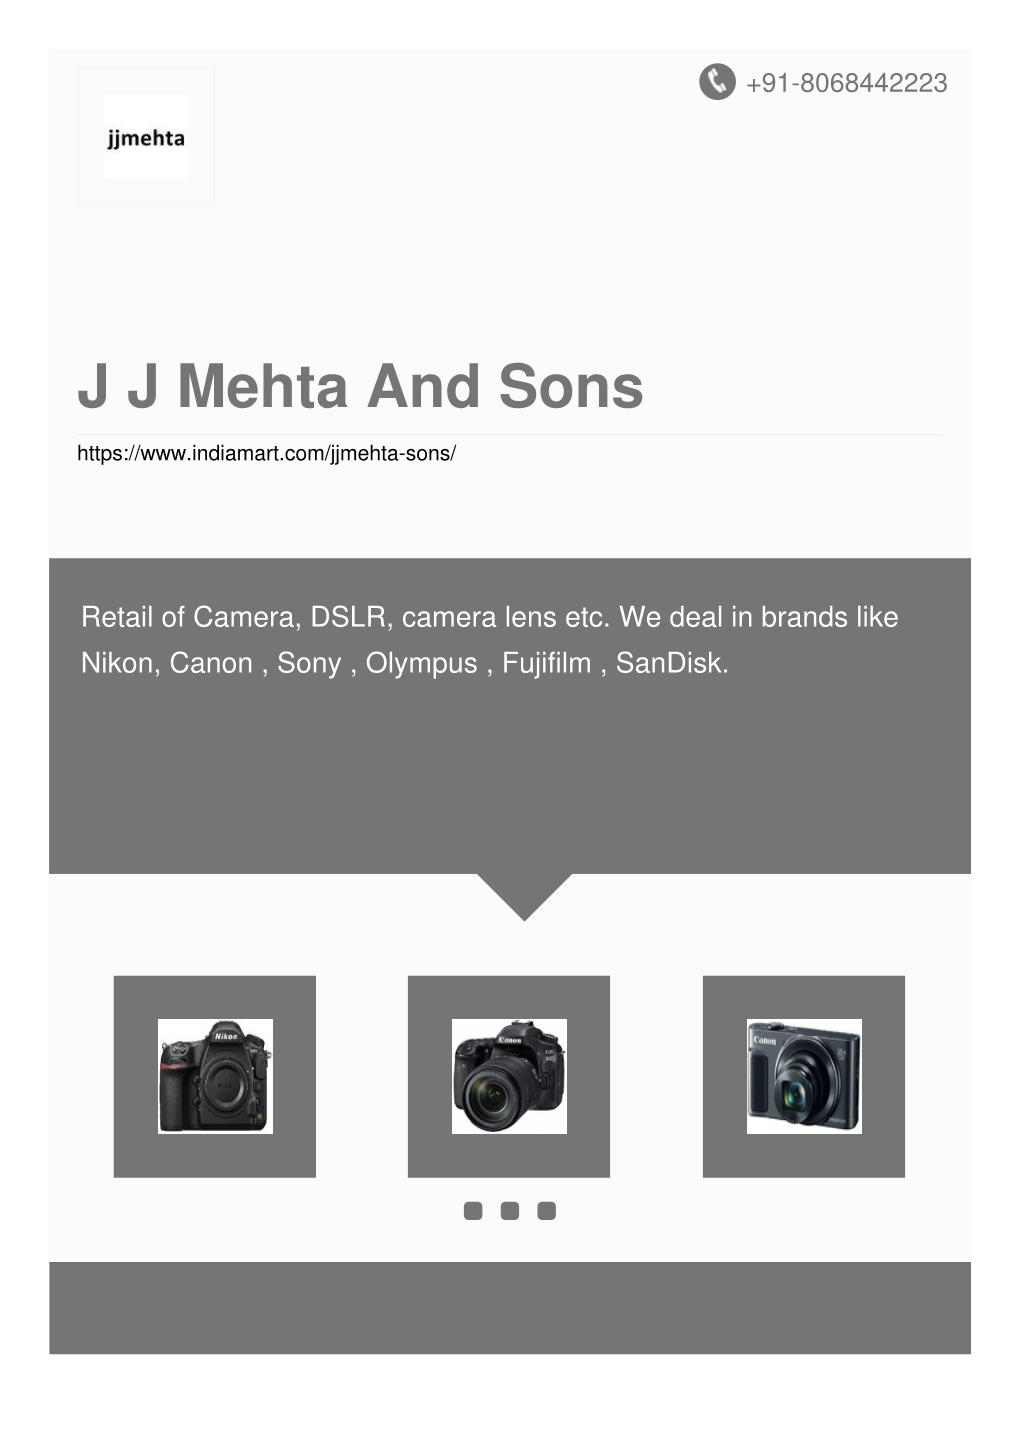 JJ Mehta and Sons